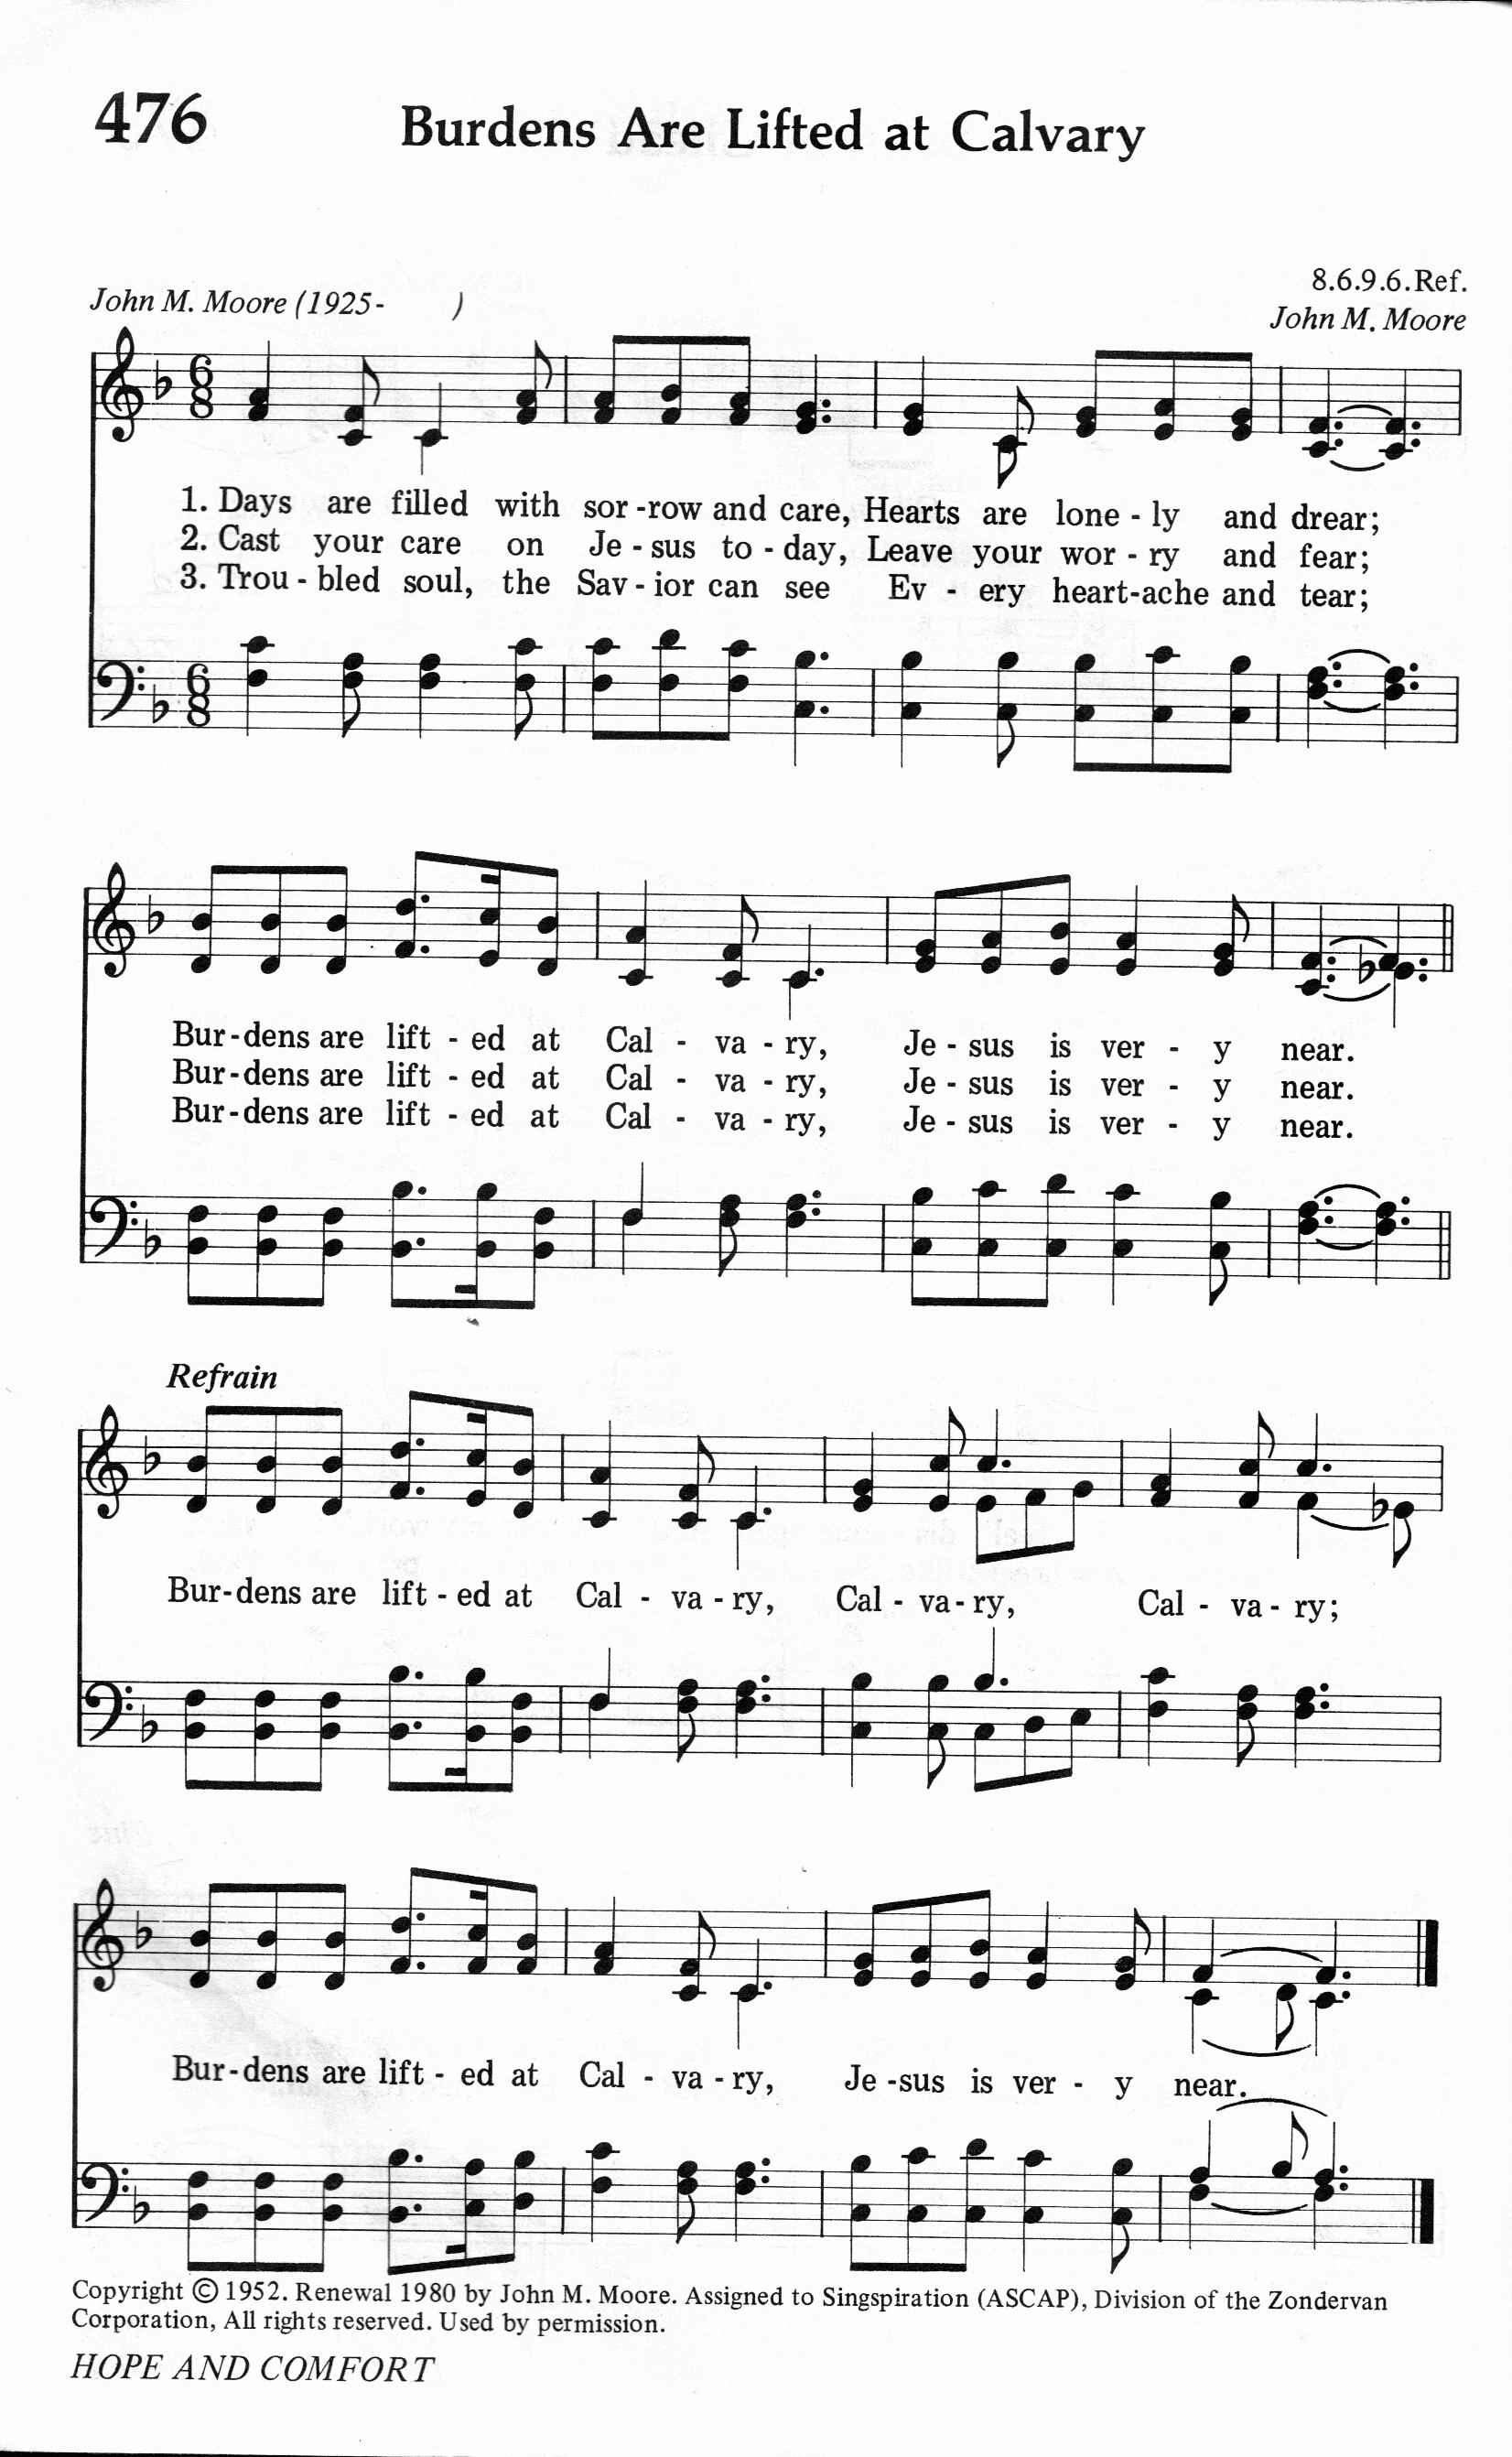 477.Come, Ye Disconsolate-695HYMN